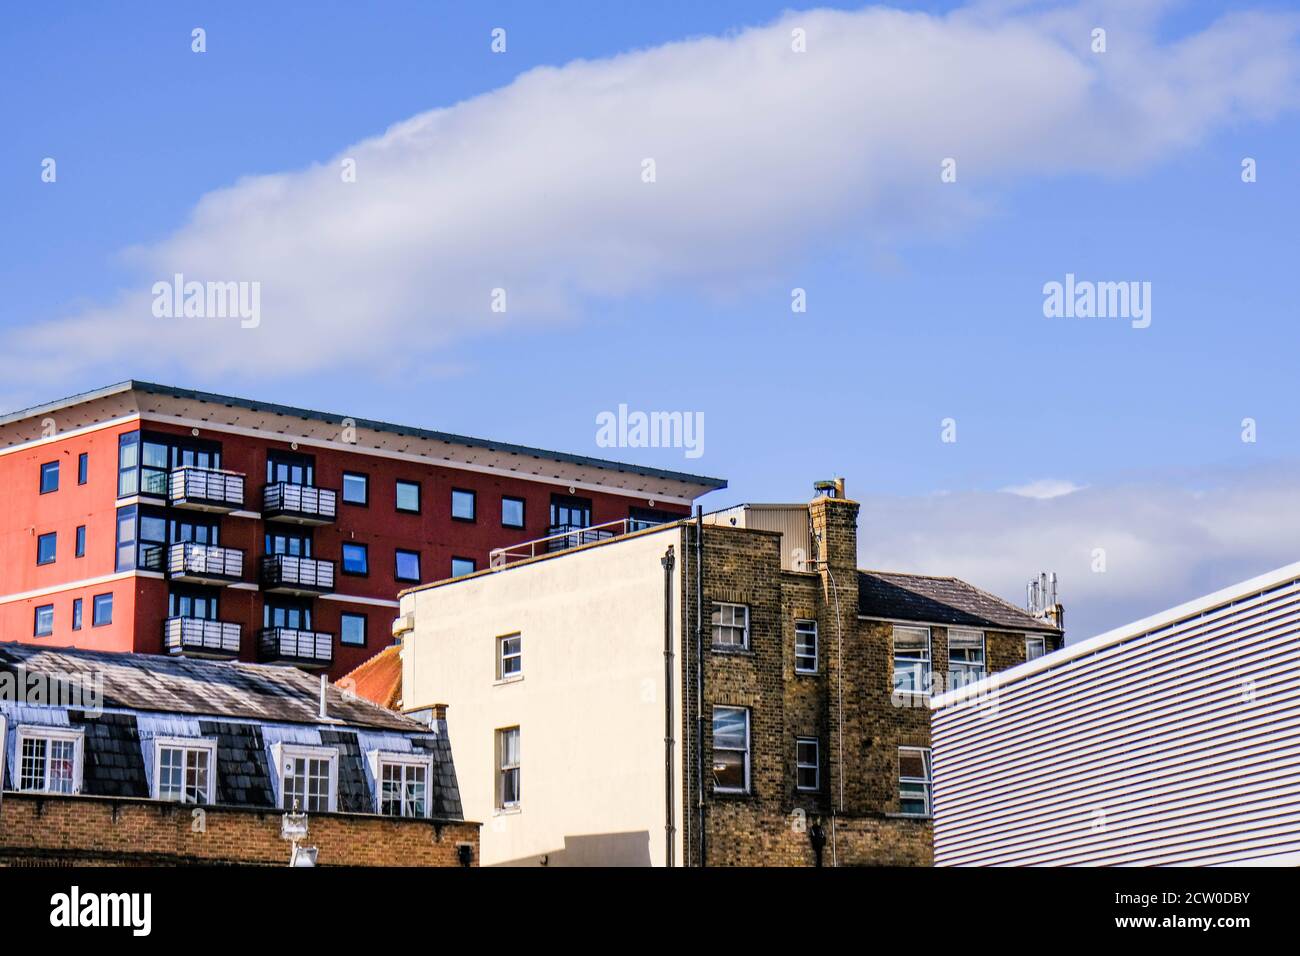 Mixture of Old And New Town Centre Buildings And Architecture Against A Blue Summer Sky With No People Stock Photo